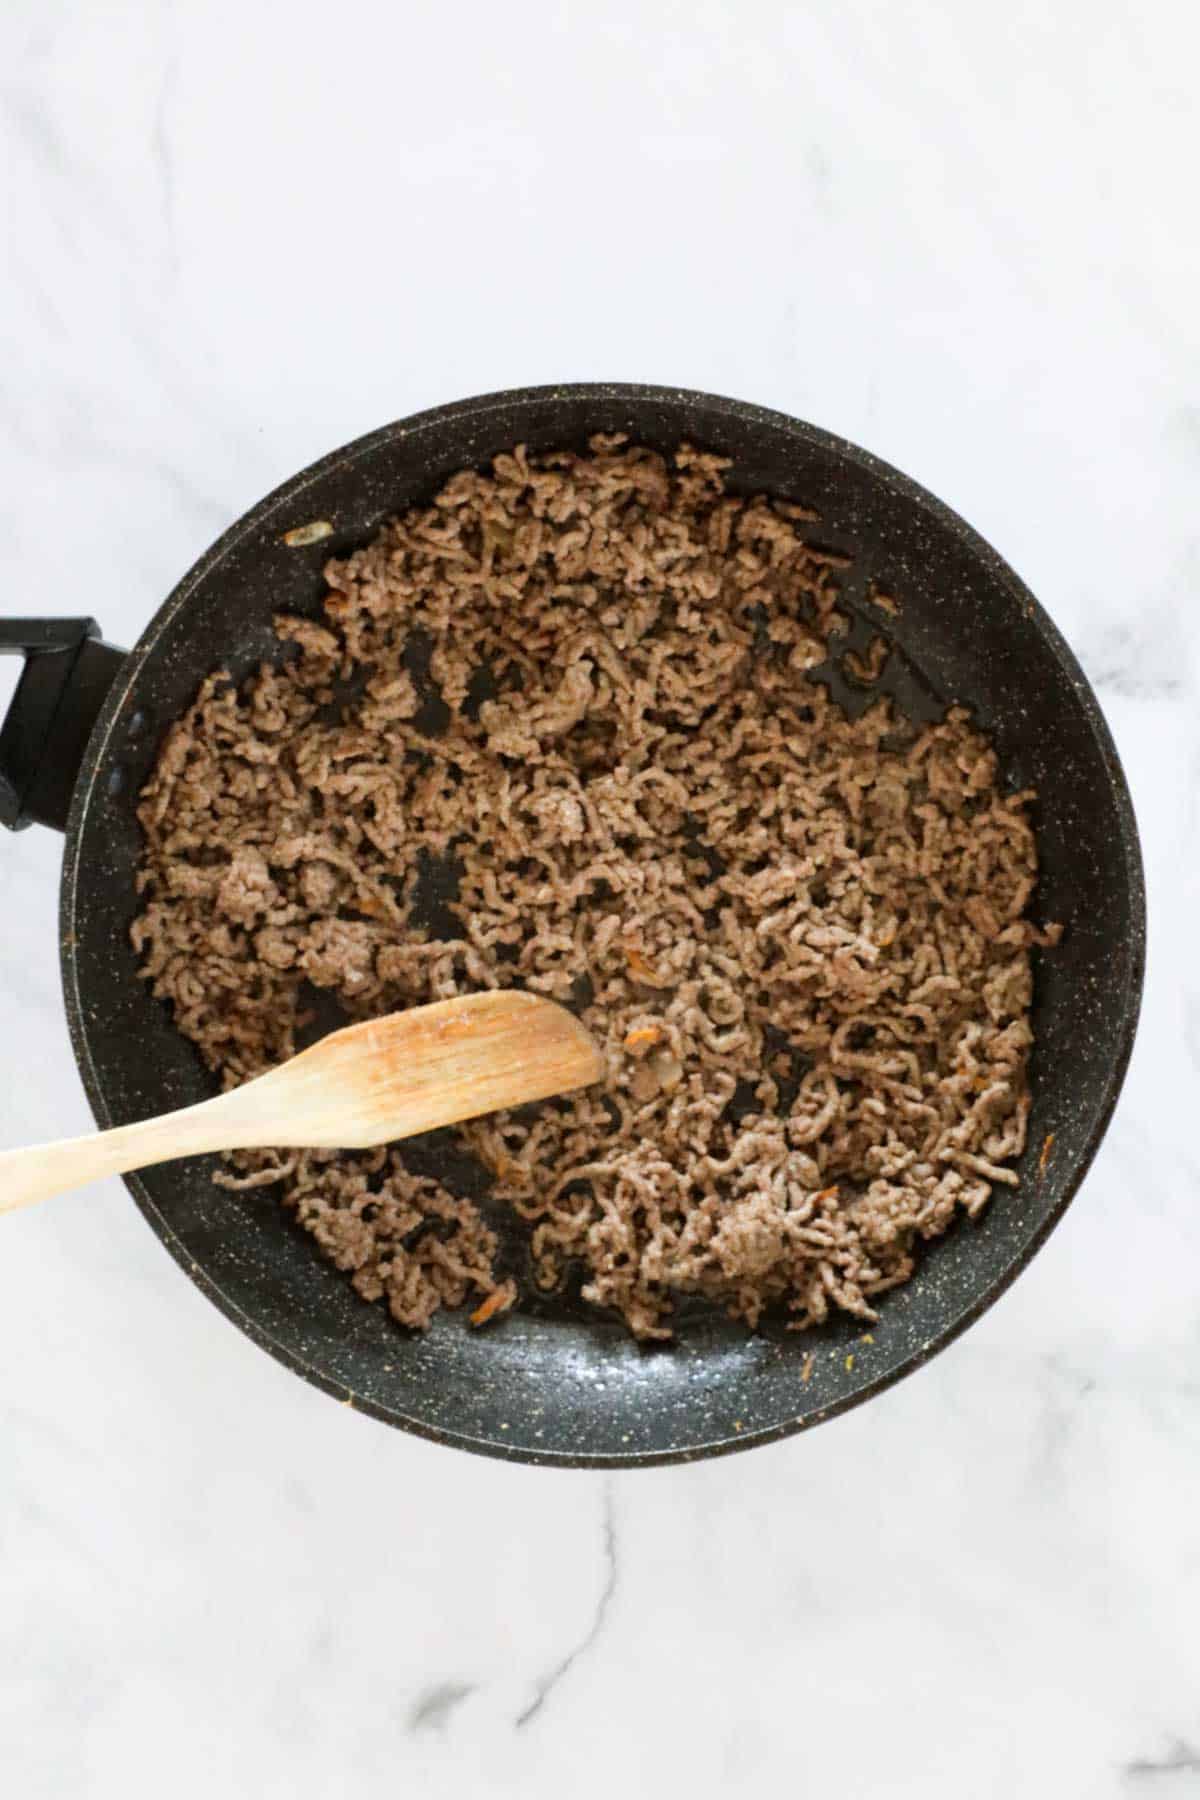 Browned beef mince in a frying pan.